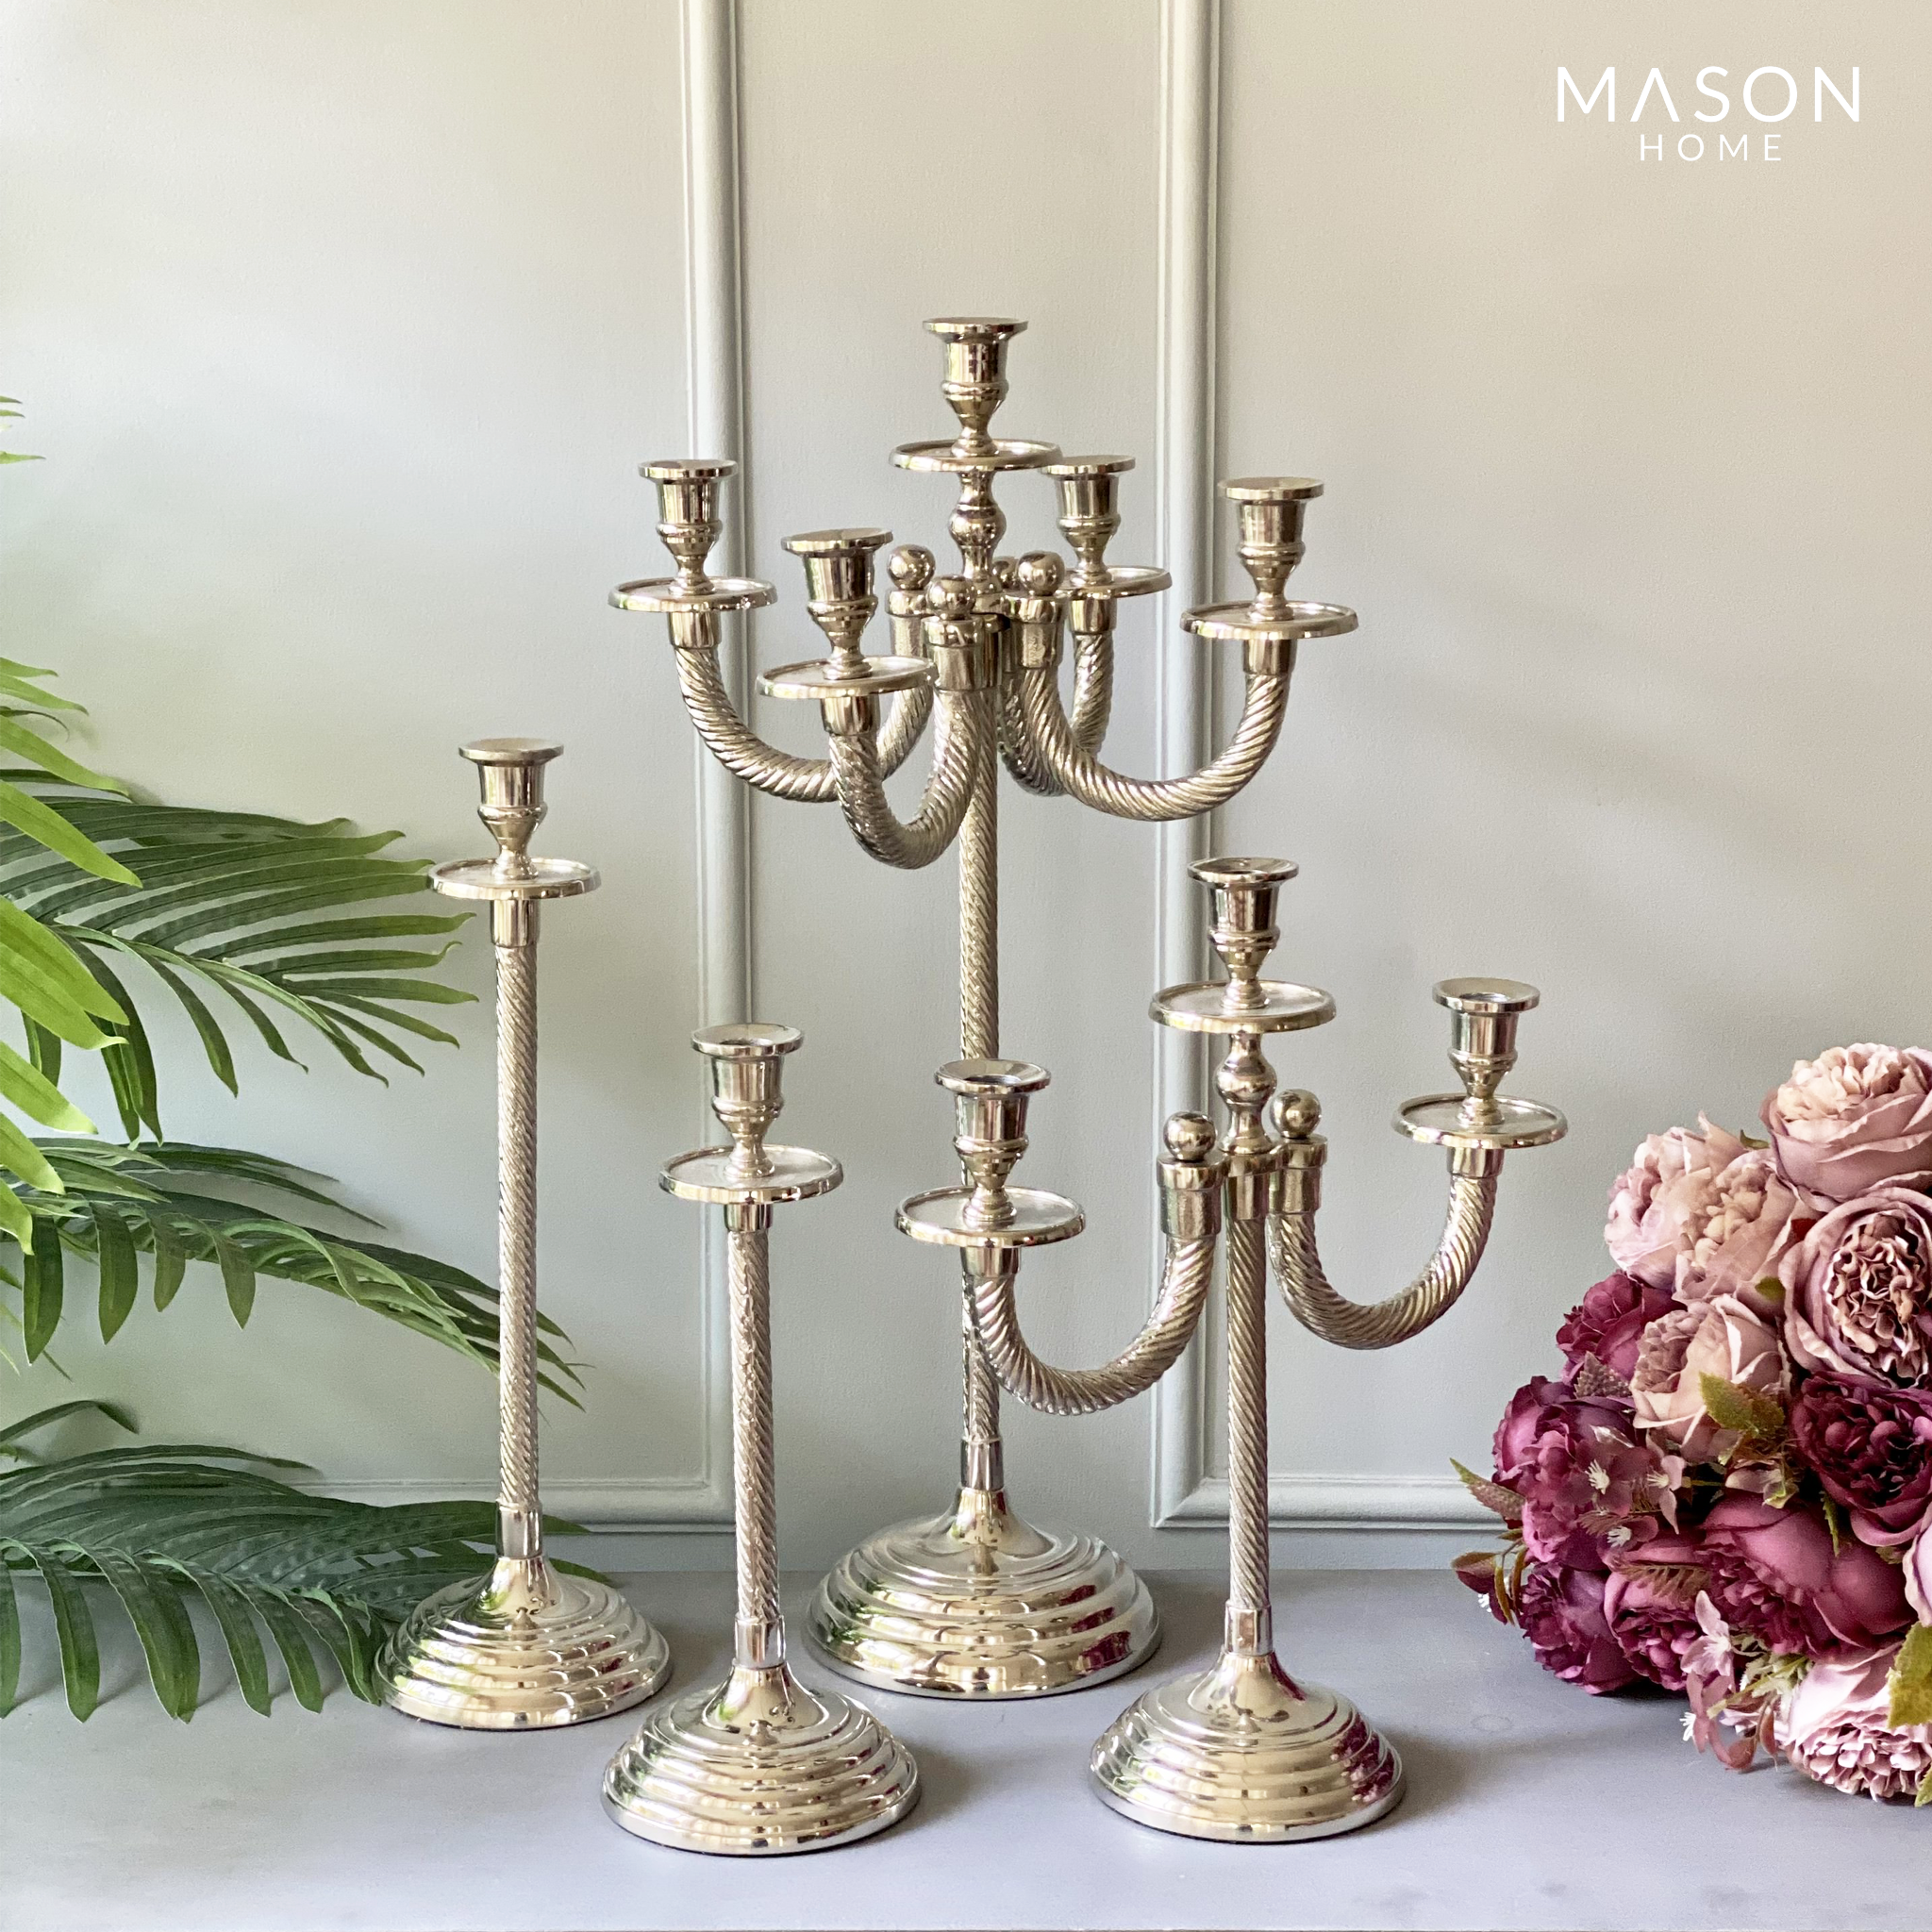 Beirut Silver Rope Candle Stand - Large – Mason Home by Amarsons